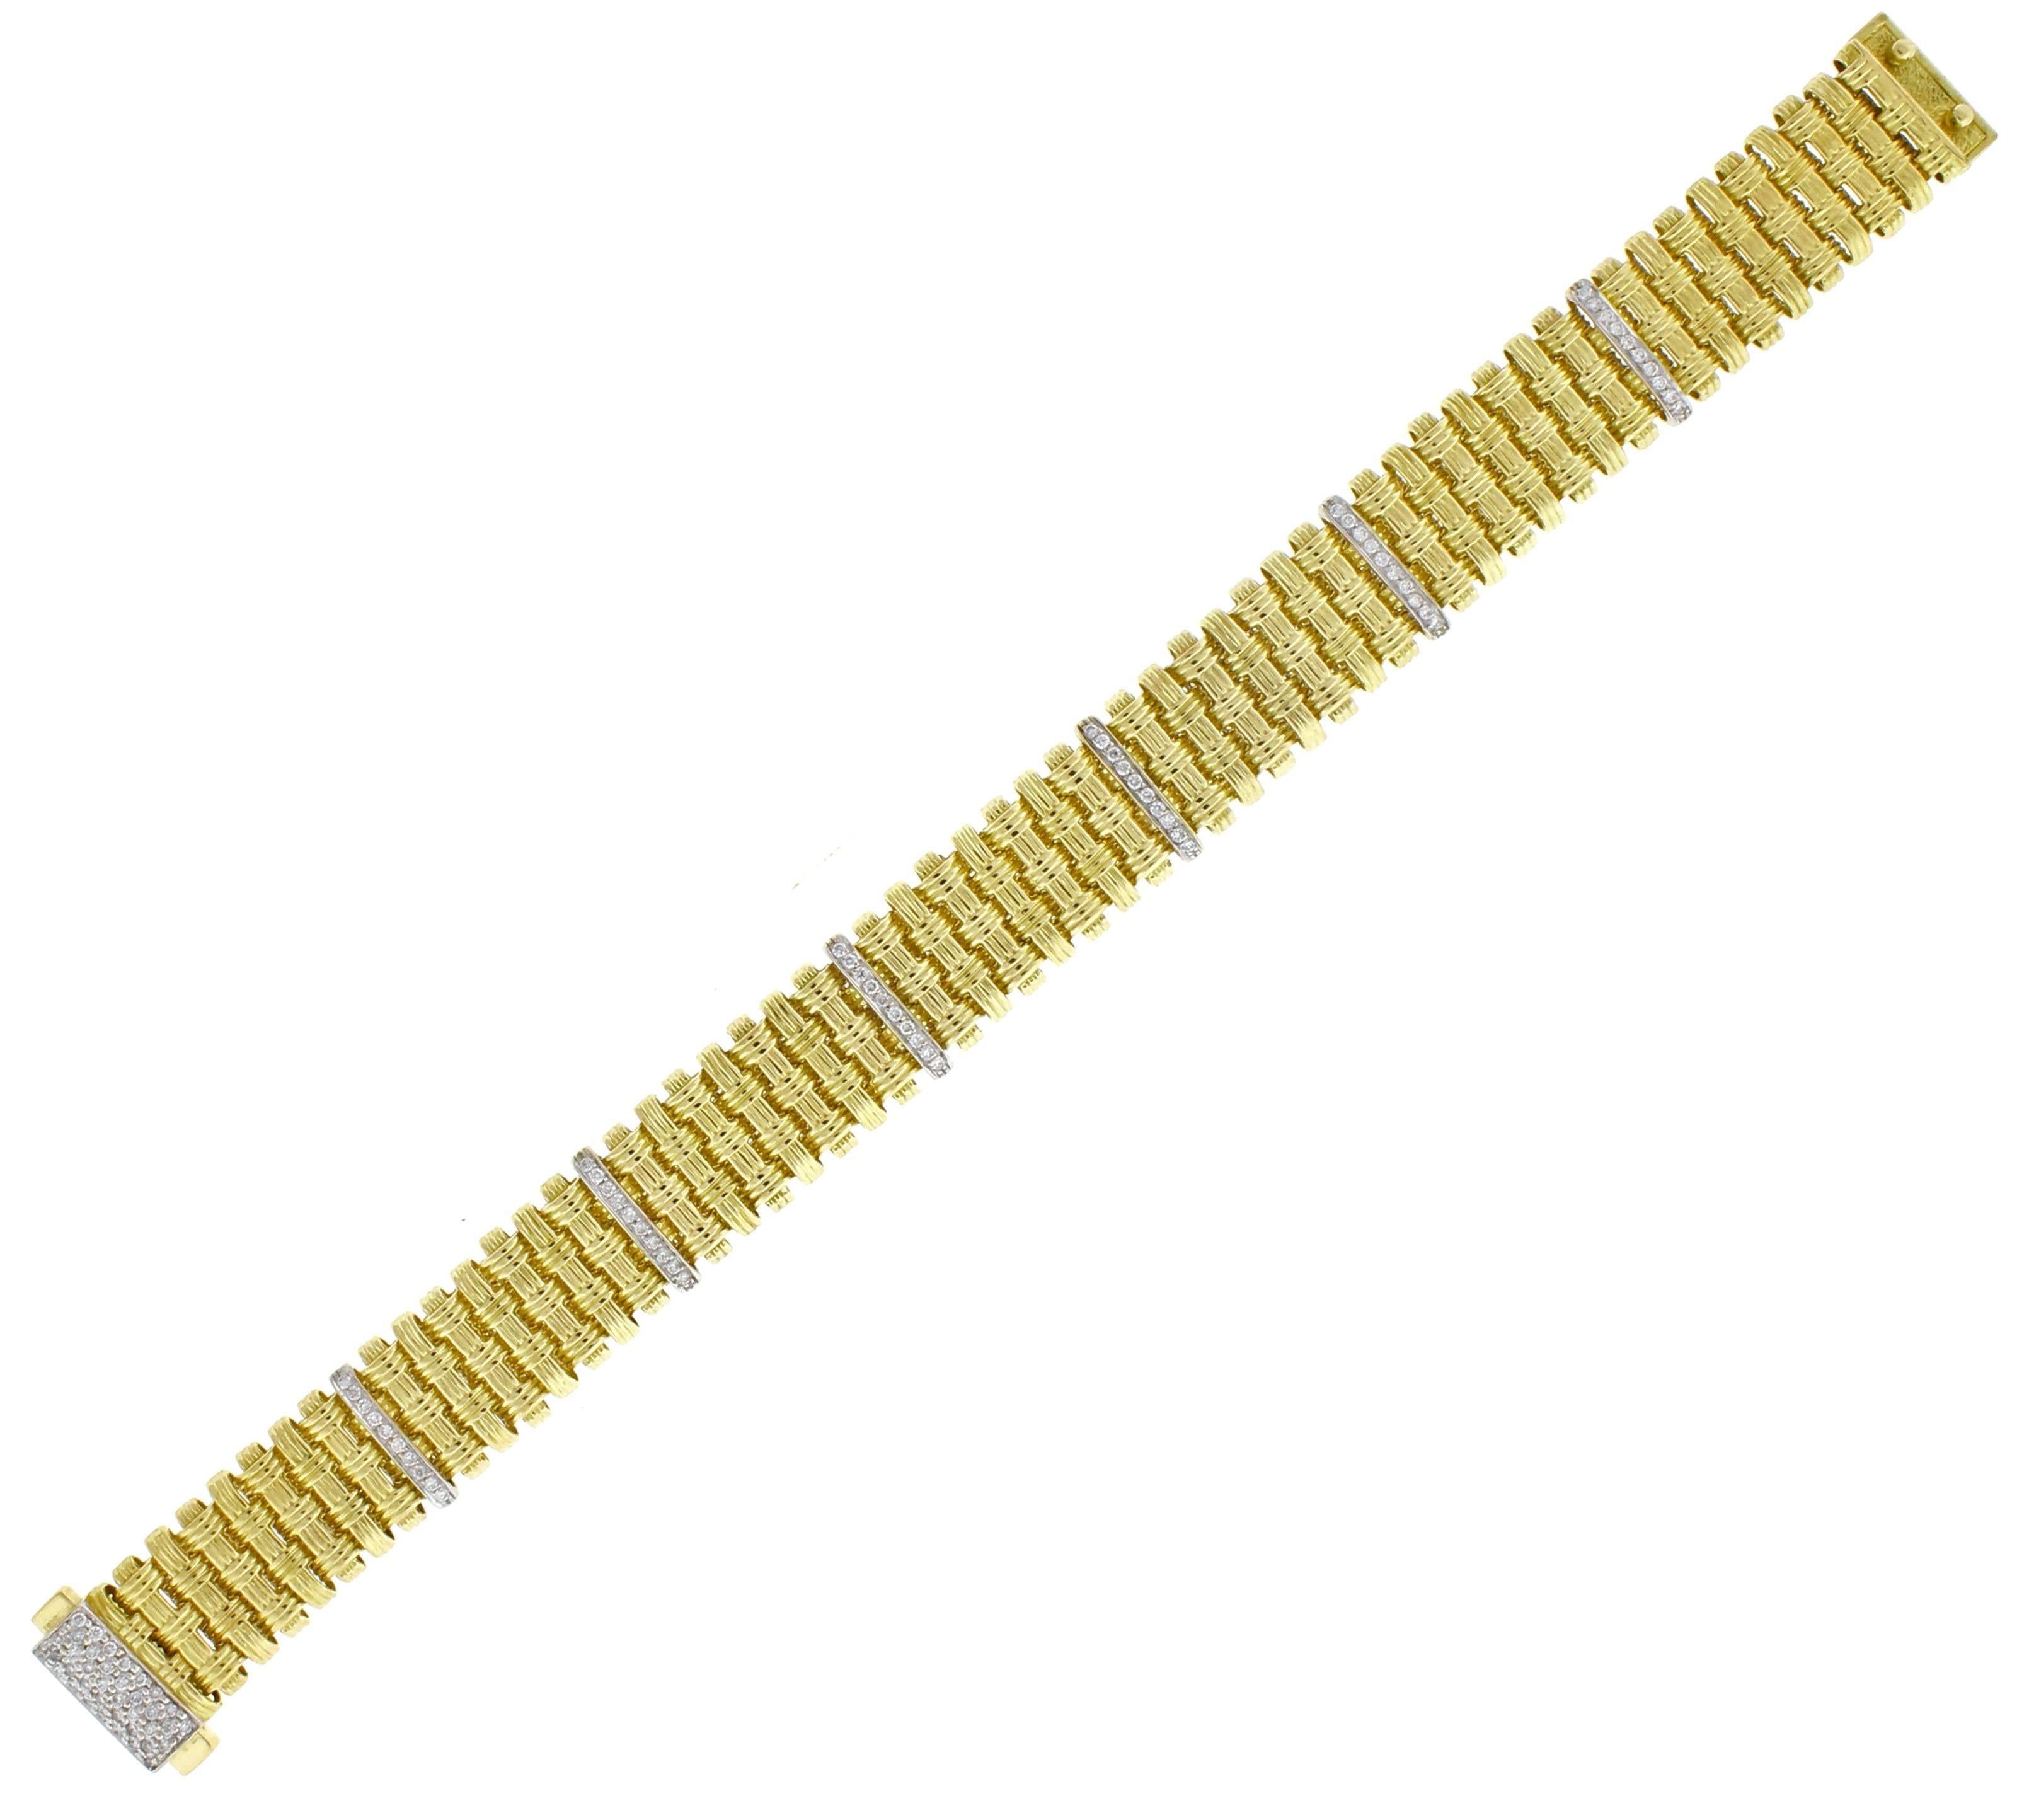 Tightly woven strands of 18 karat gold are the signature of Roberto Coin's Appassionata collection This five row diamond bracelet boasts 98 brilliant diamonds weigh approximately .50 carats. 42 grams.  7 1/8 long 1/2 inch + wide.